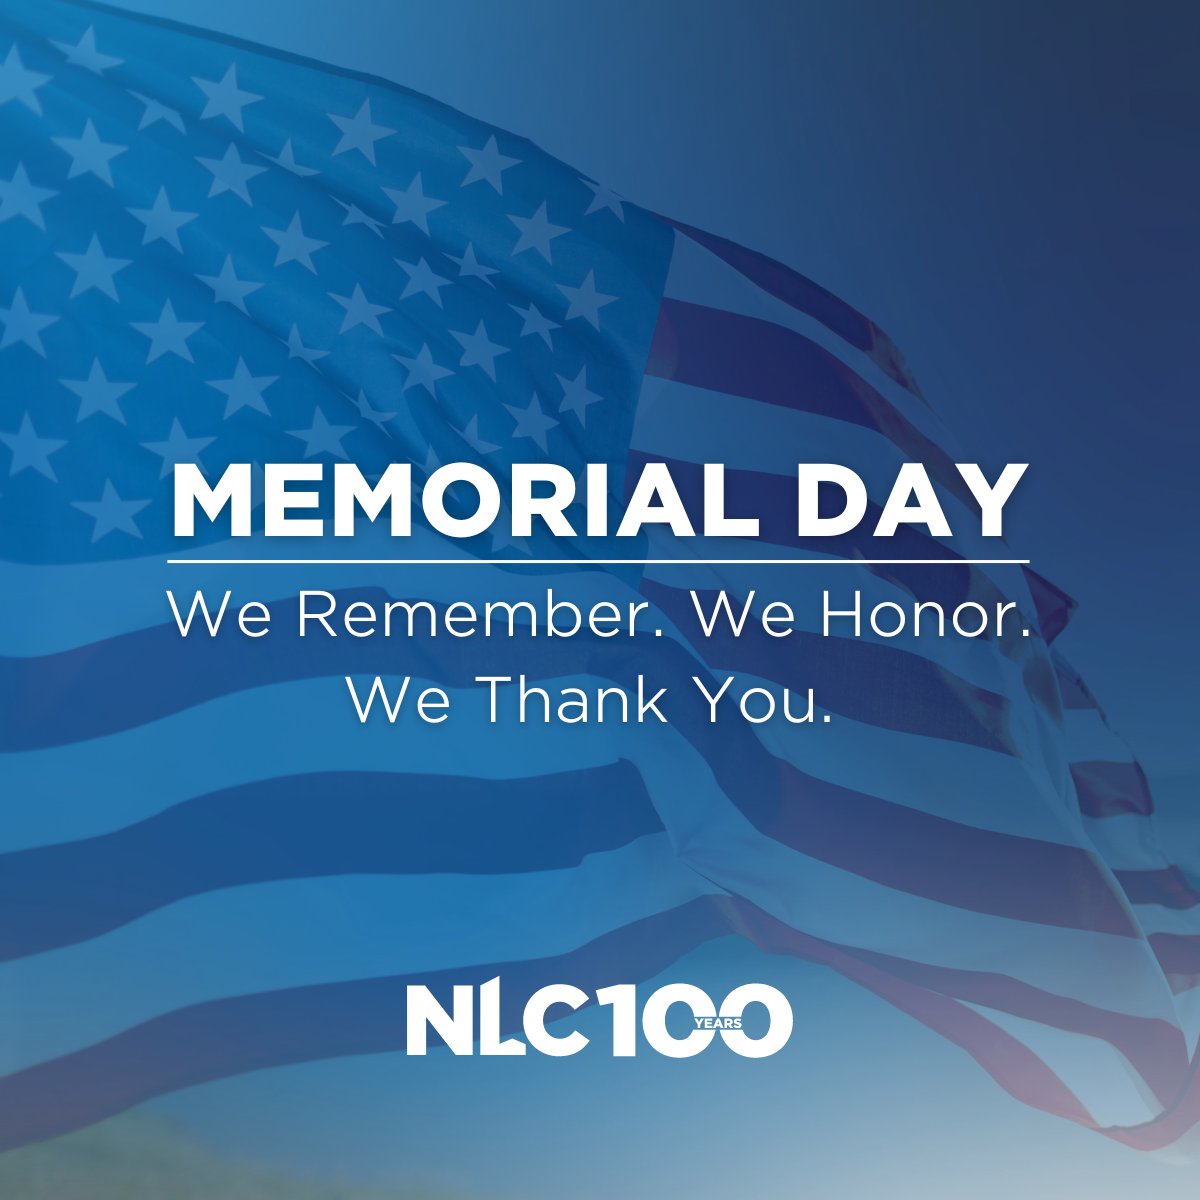 From cities large and small, across our great nation, we express our heartfelt appreciation for those who have served and fallen. Their legacy lives on in the communities we build and the values we uphold. We Remember. We Honor. We Thank You. #MemorialDay